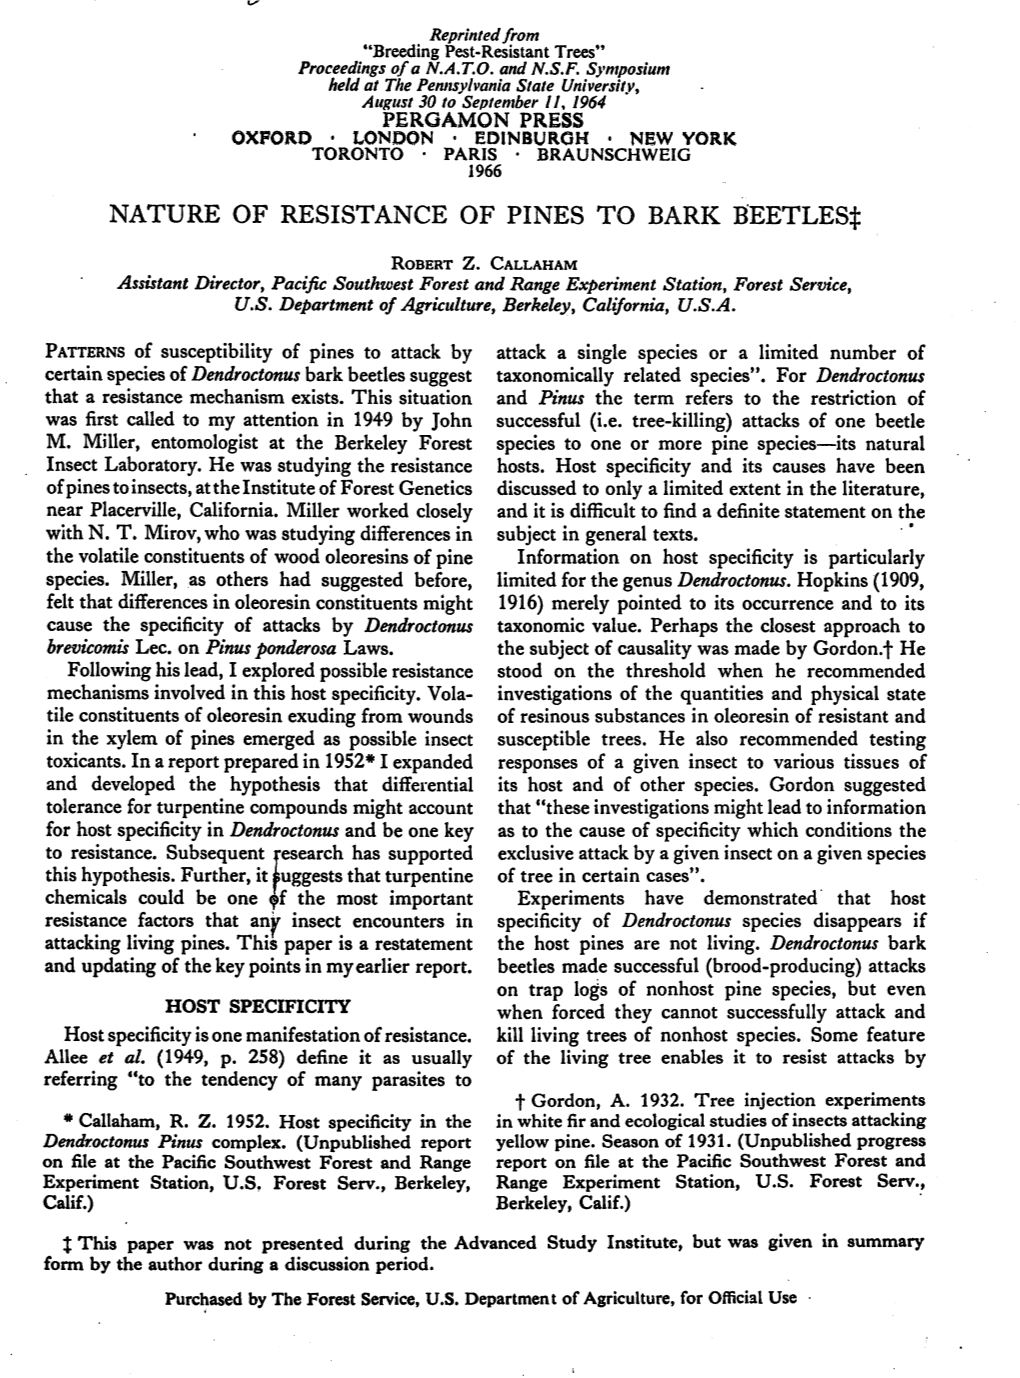 Nature of Resistance of Pines to Bark Beetles^